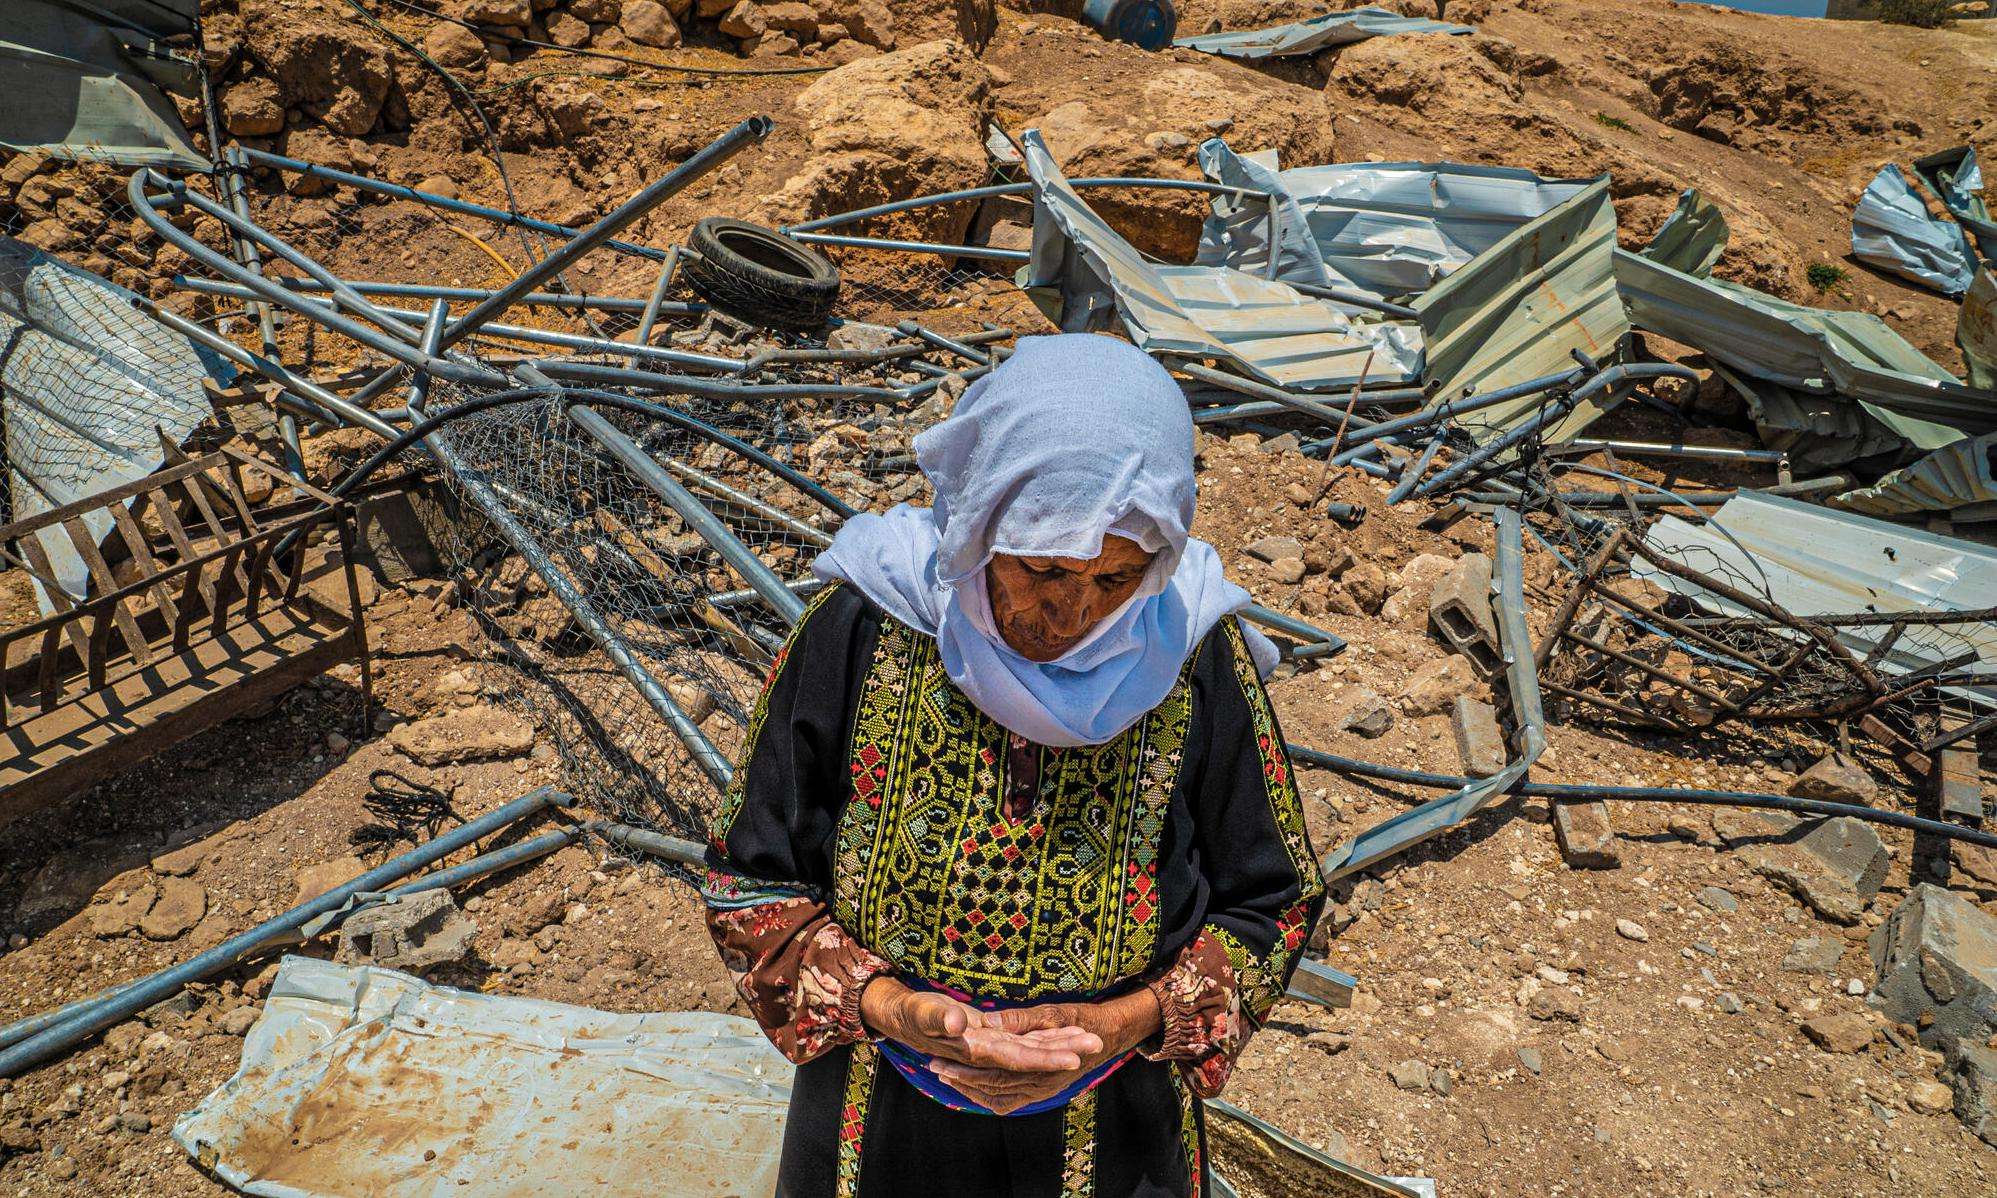 A woman in traditional Palestinian dress in front of the ruins of her home after it was demolished by Israeli forces in Masafer Yatta, West Bank.